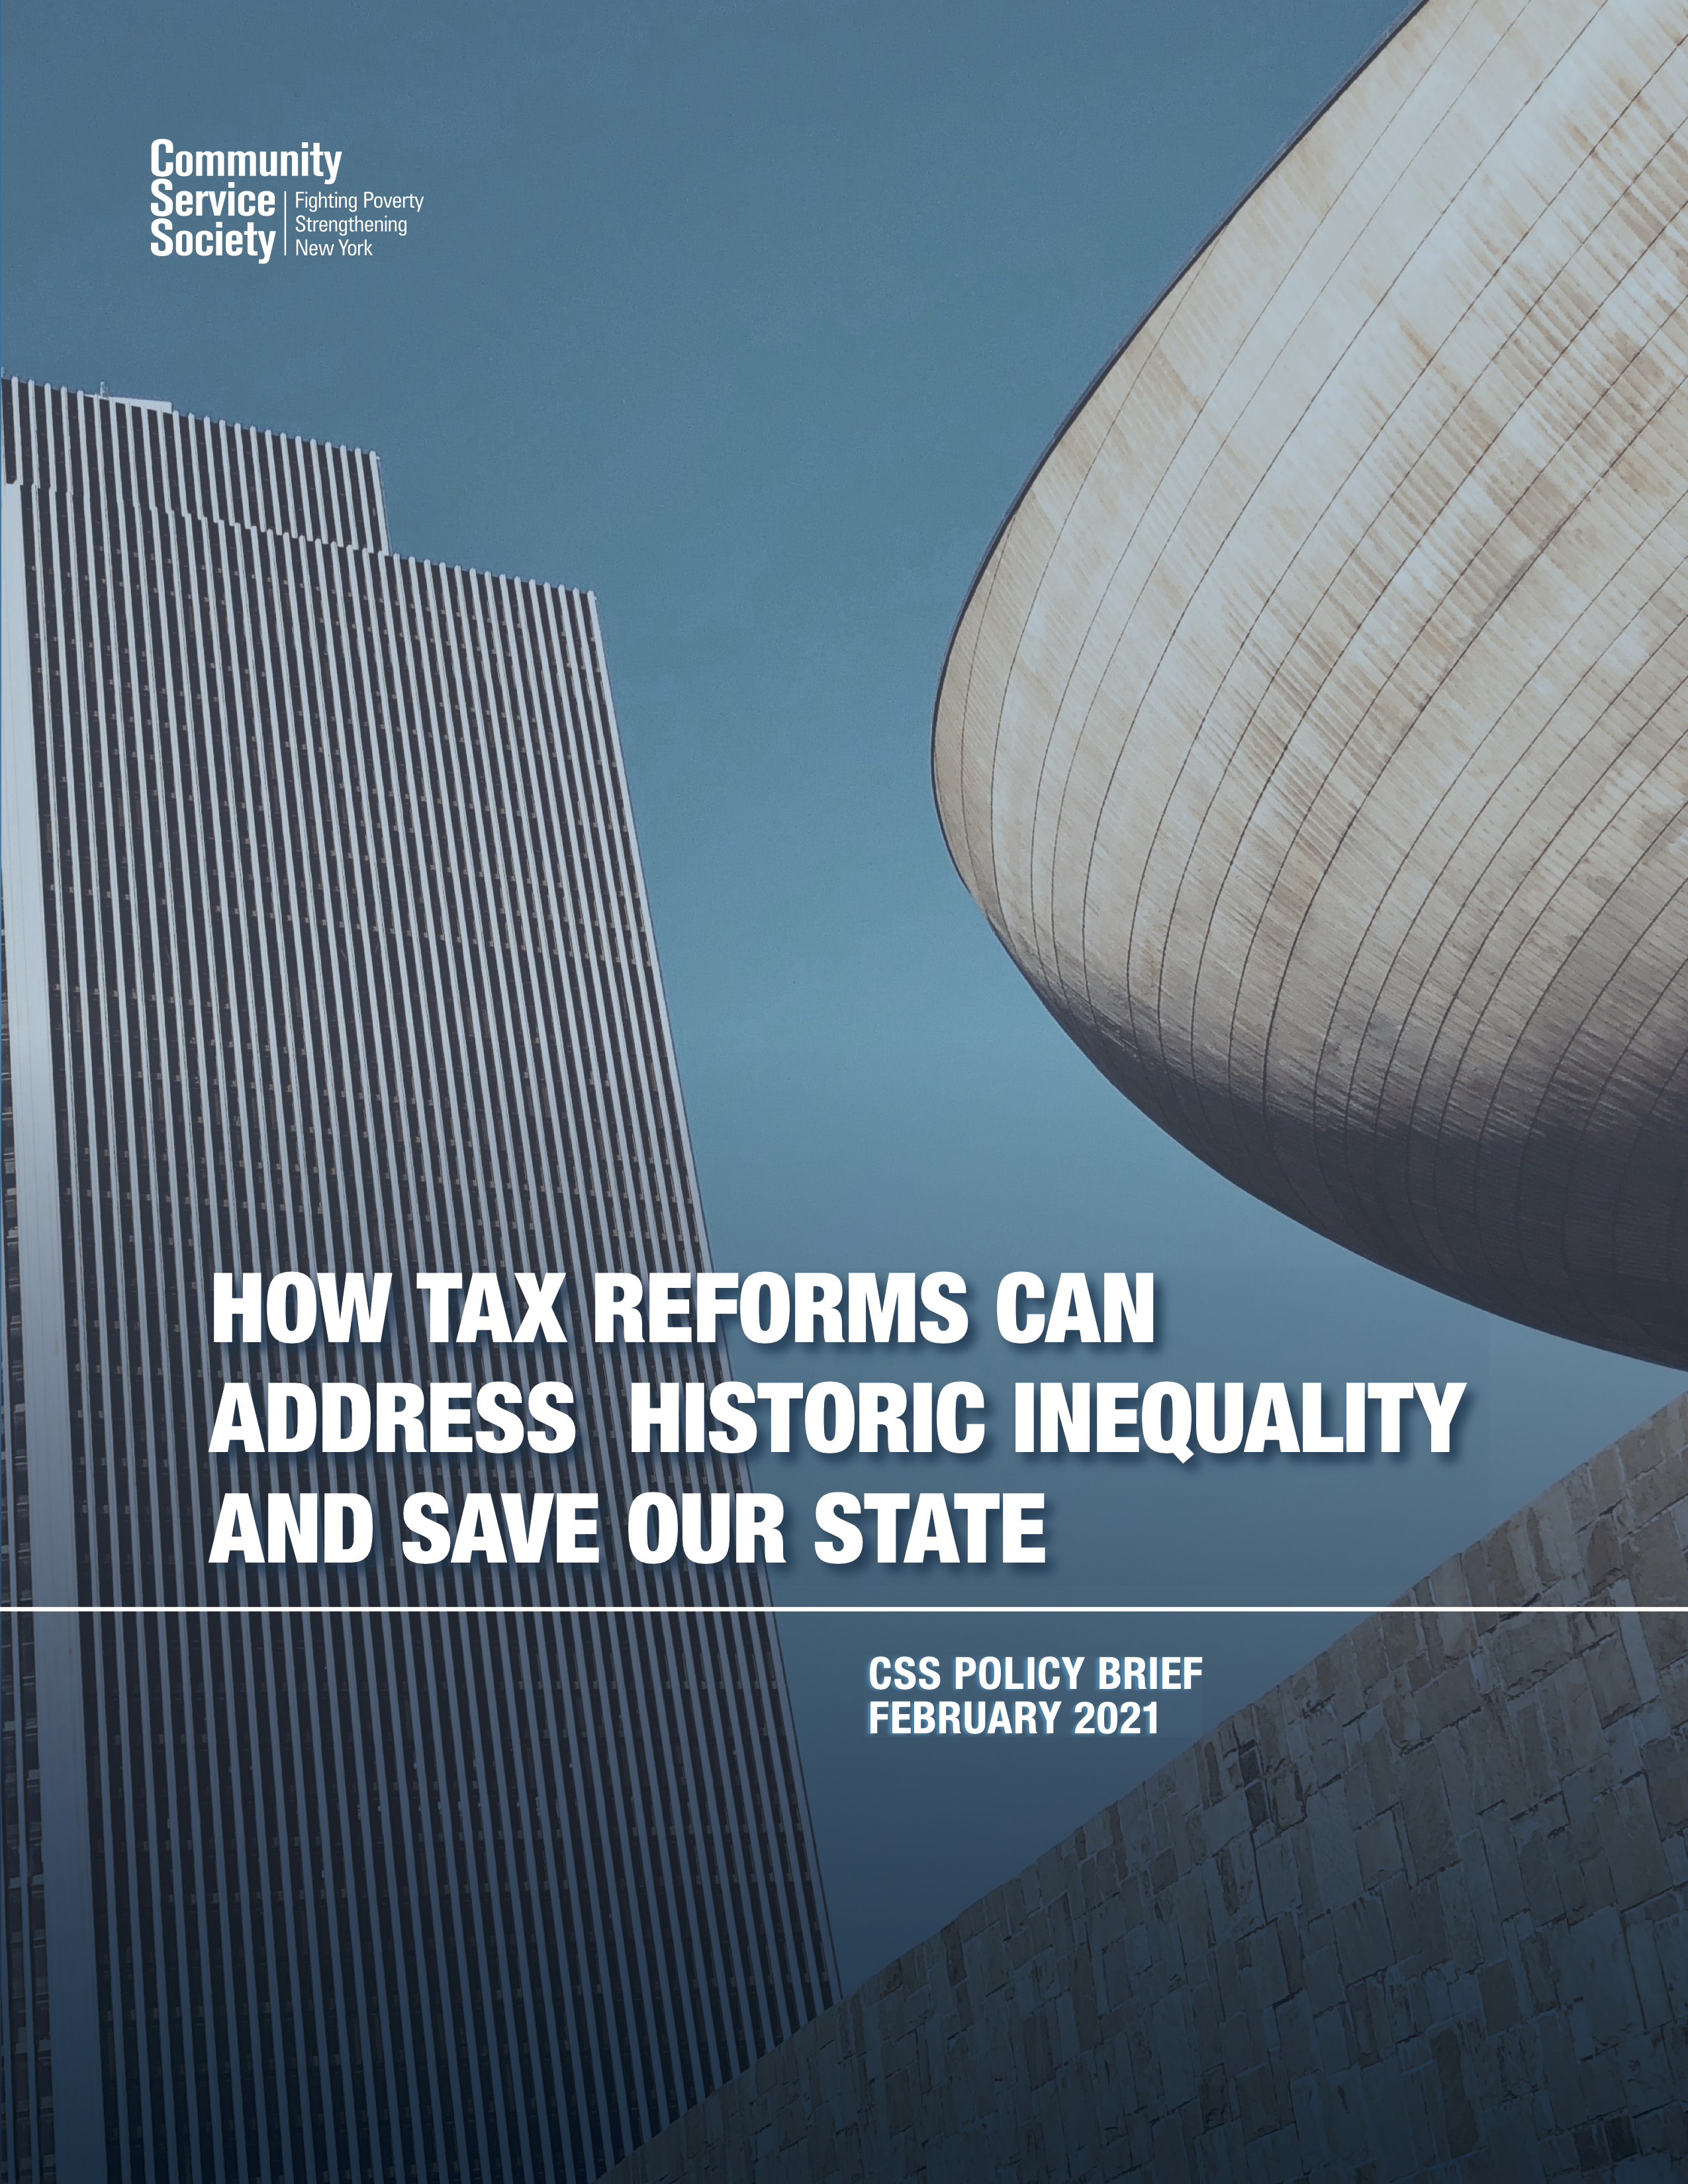 How Tax Reforms Can Address Historic Inequality and Save Our State